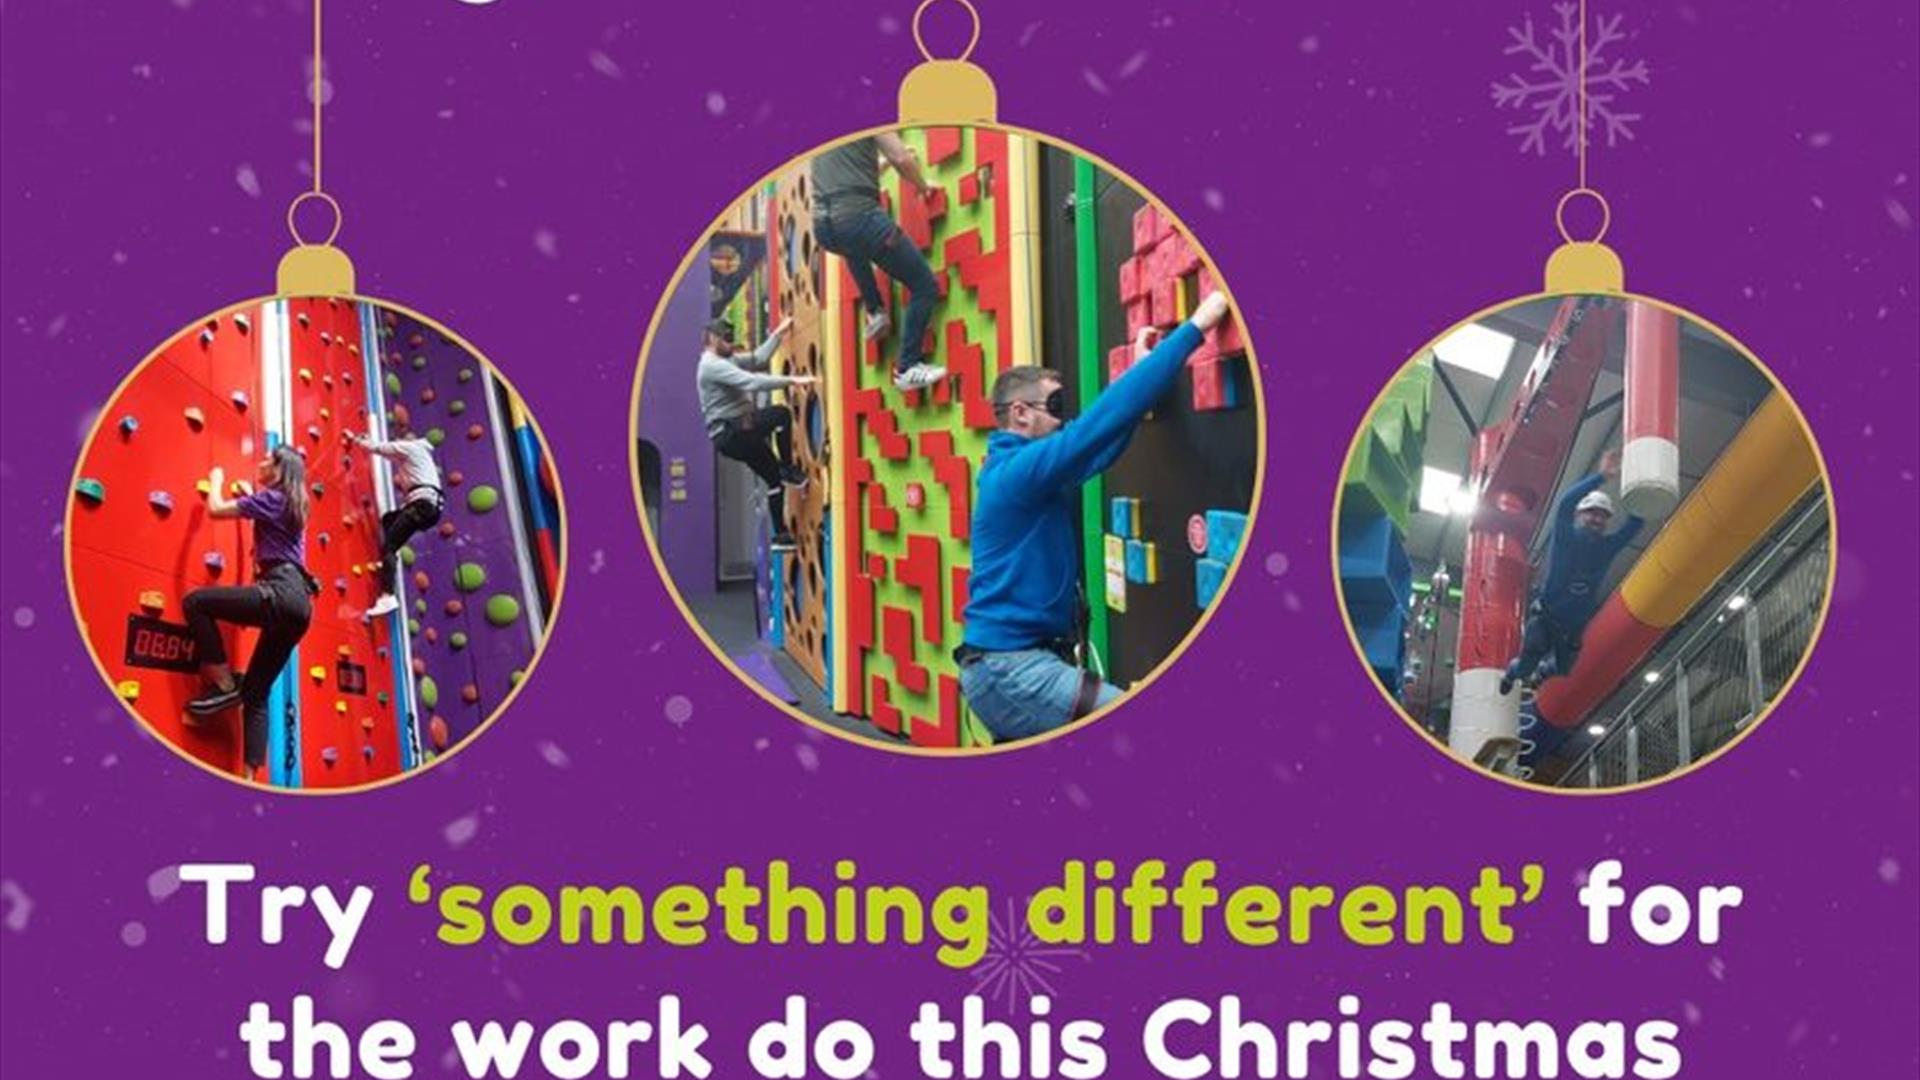 Image shows purple poster with images of people on climbing wall.  Also written text in green and white advertising for something different to do at C